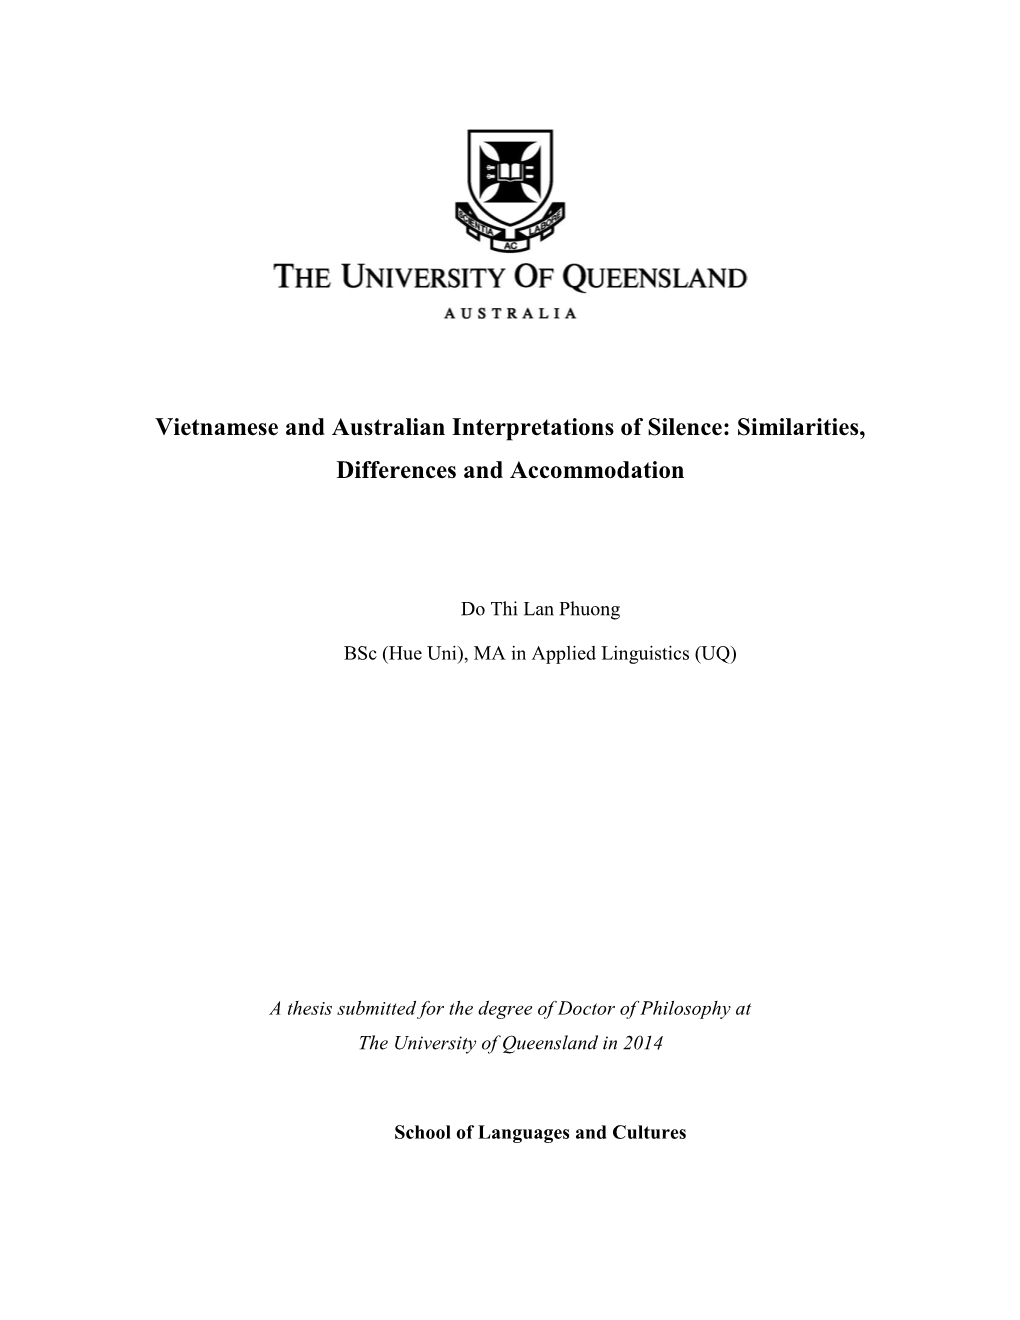 Vietnamese and Australian Interpretations of Silence: Similarities, Differences and Accommodation